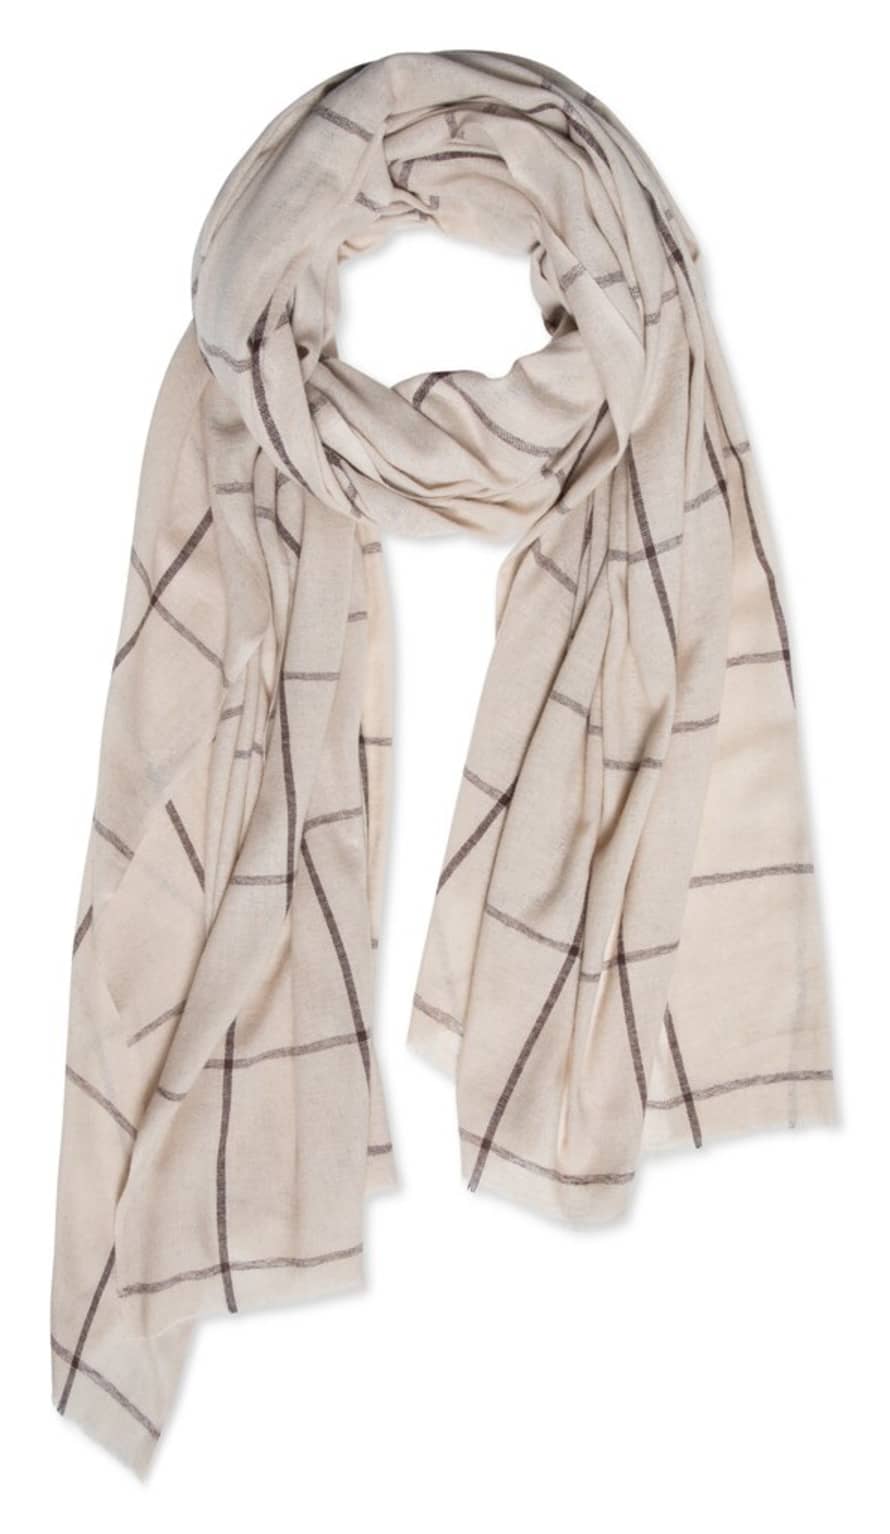 Yaya Checked Scarf in Recycled Fabric - Cement Dessin 